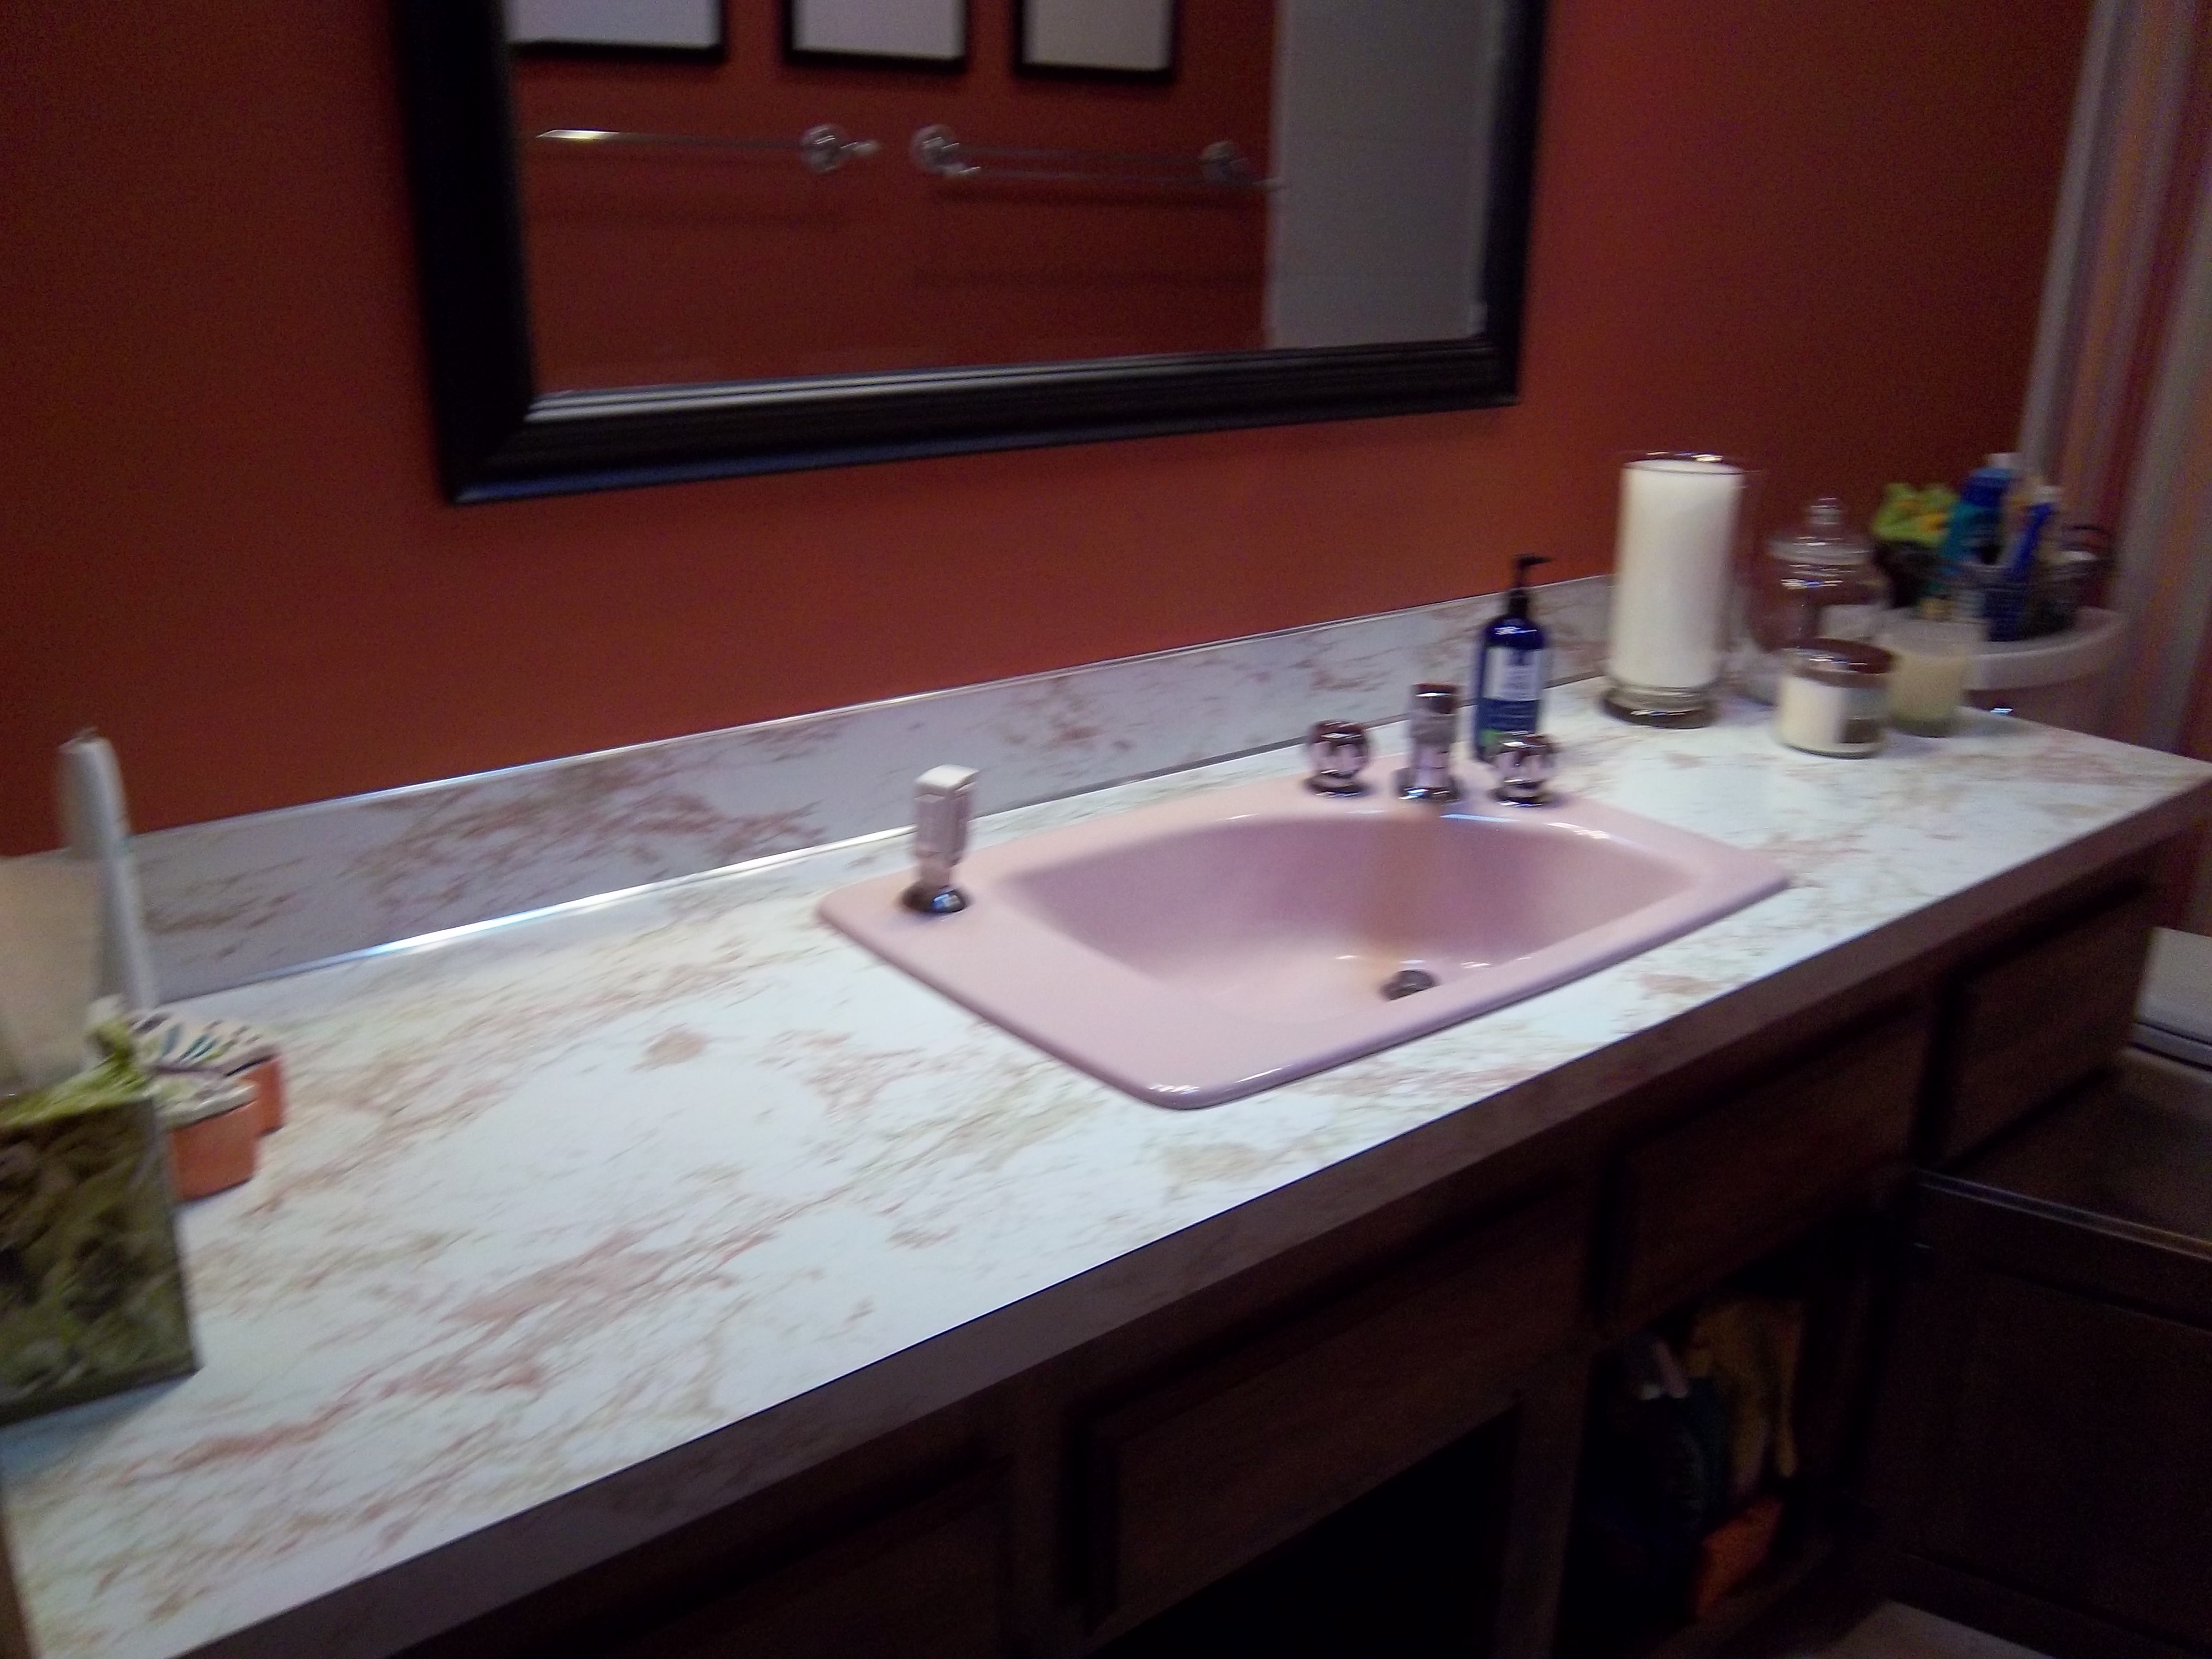 Mr Direct 19 In Undermount Bathroom Sink In Bisque With Gray Sinklink Upmb Slg The Home Depot